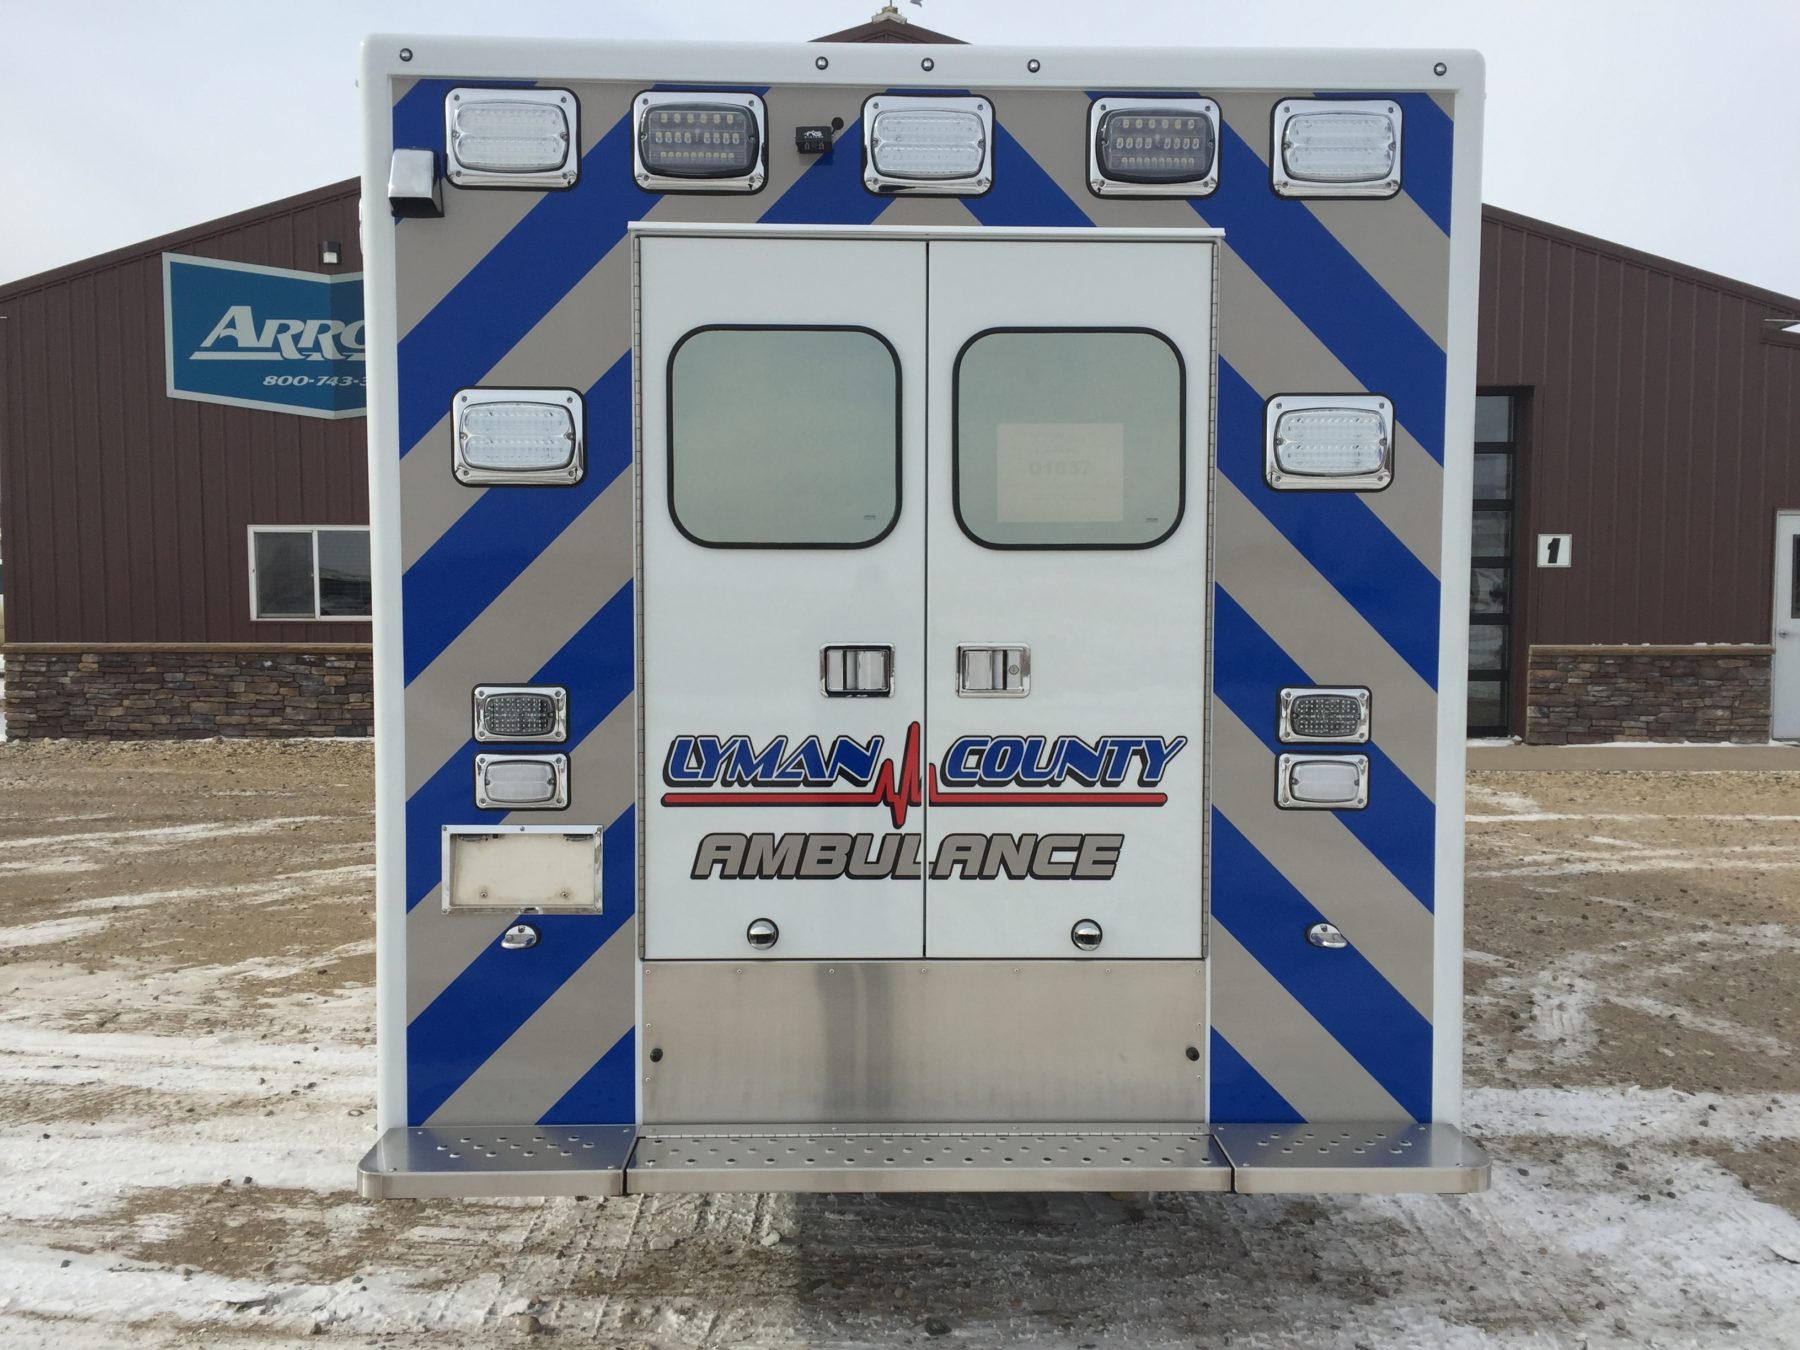 2018 Ford F450 4x4 Heavy Duty Ambulance For Sale – Picture 8